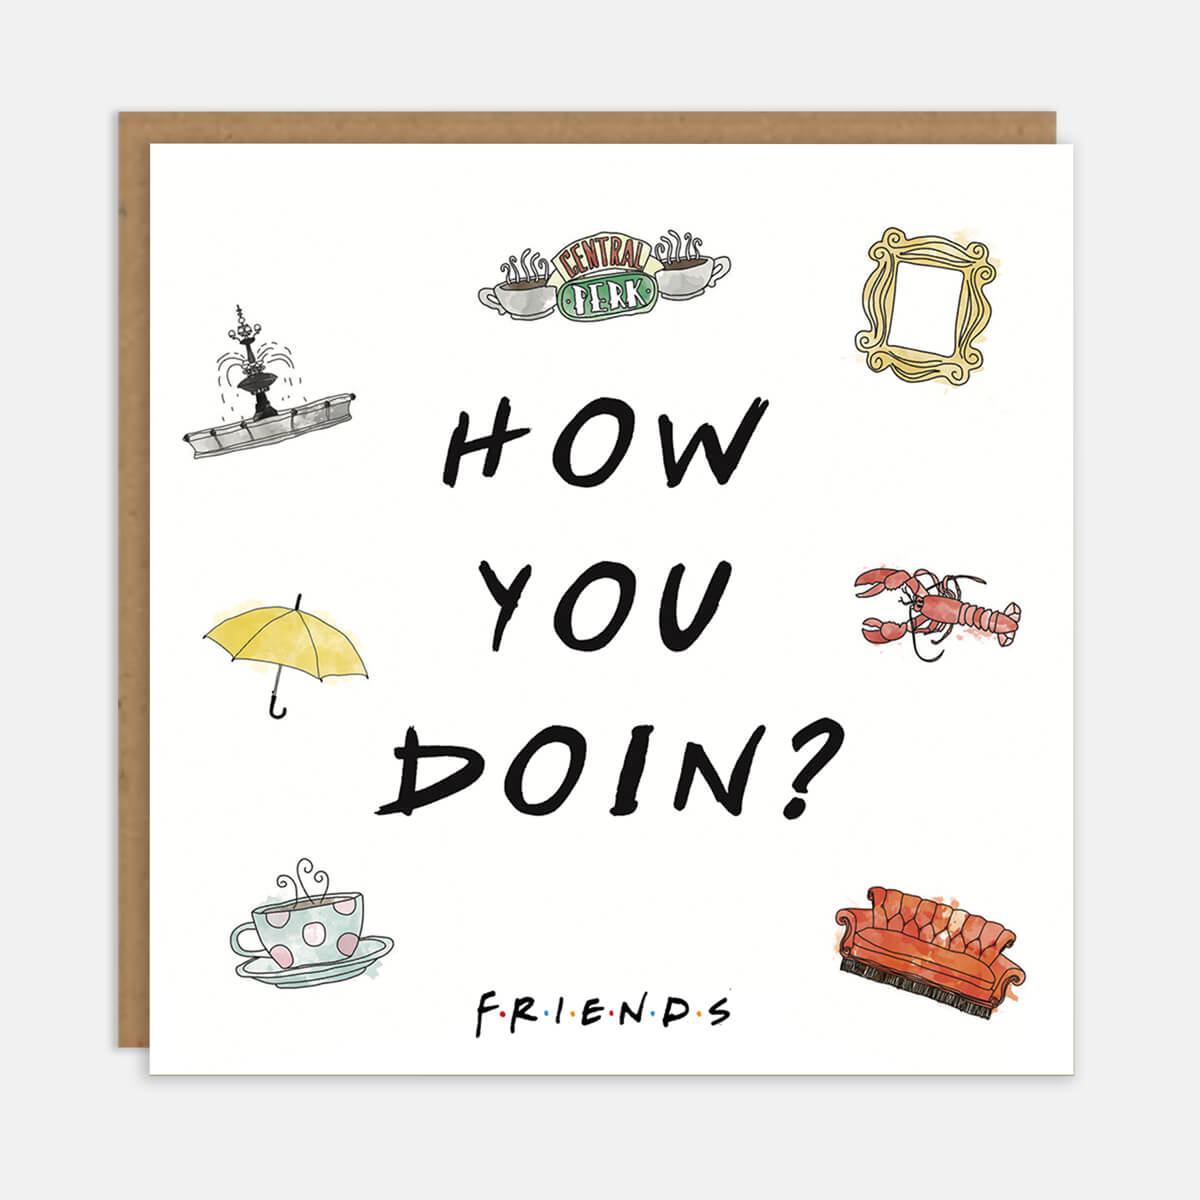 Friends TV Show Greetings Card which reads 'How You Doin?' an iconic line by Joey Tribbiani